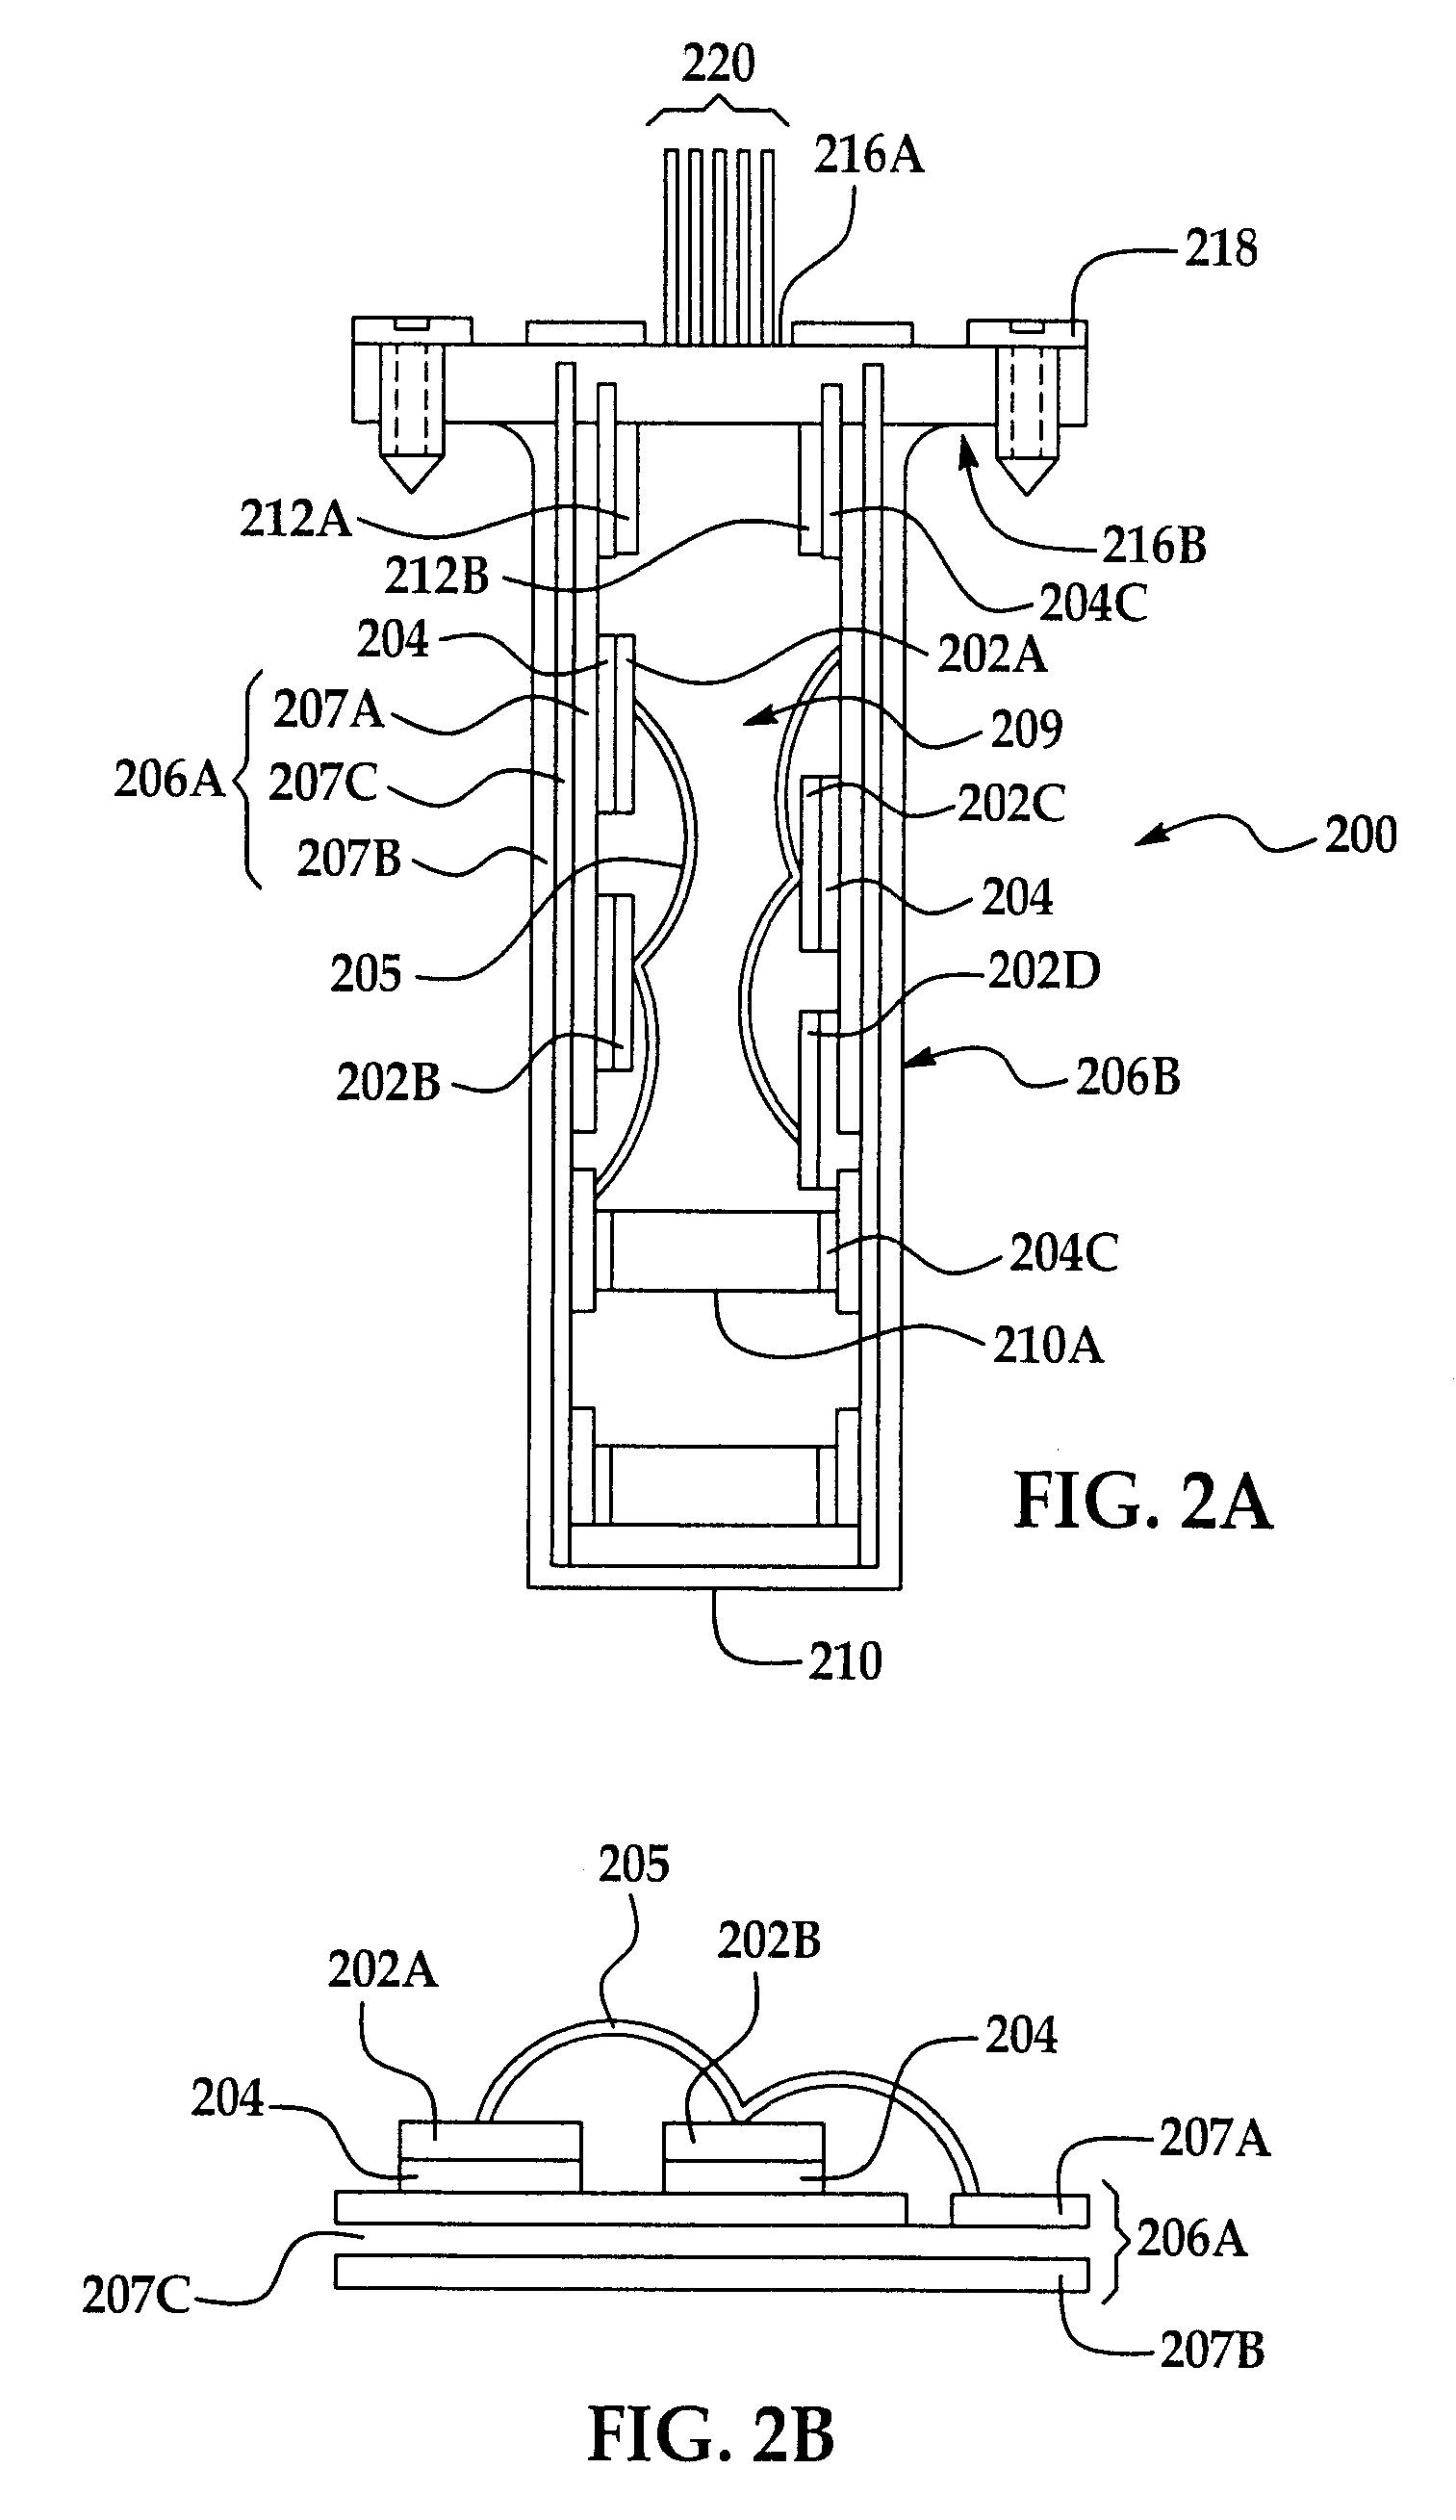 Direct dipping cooled power module and packaging